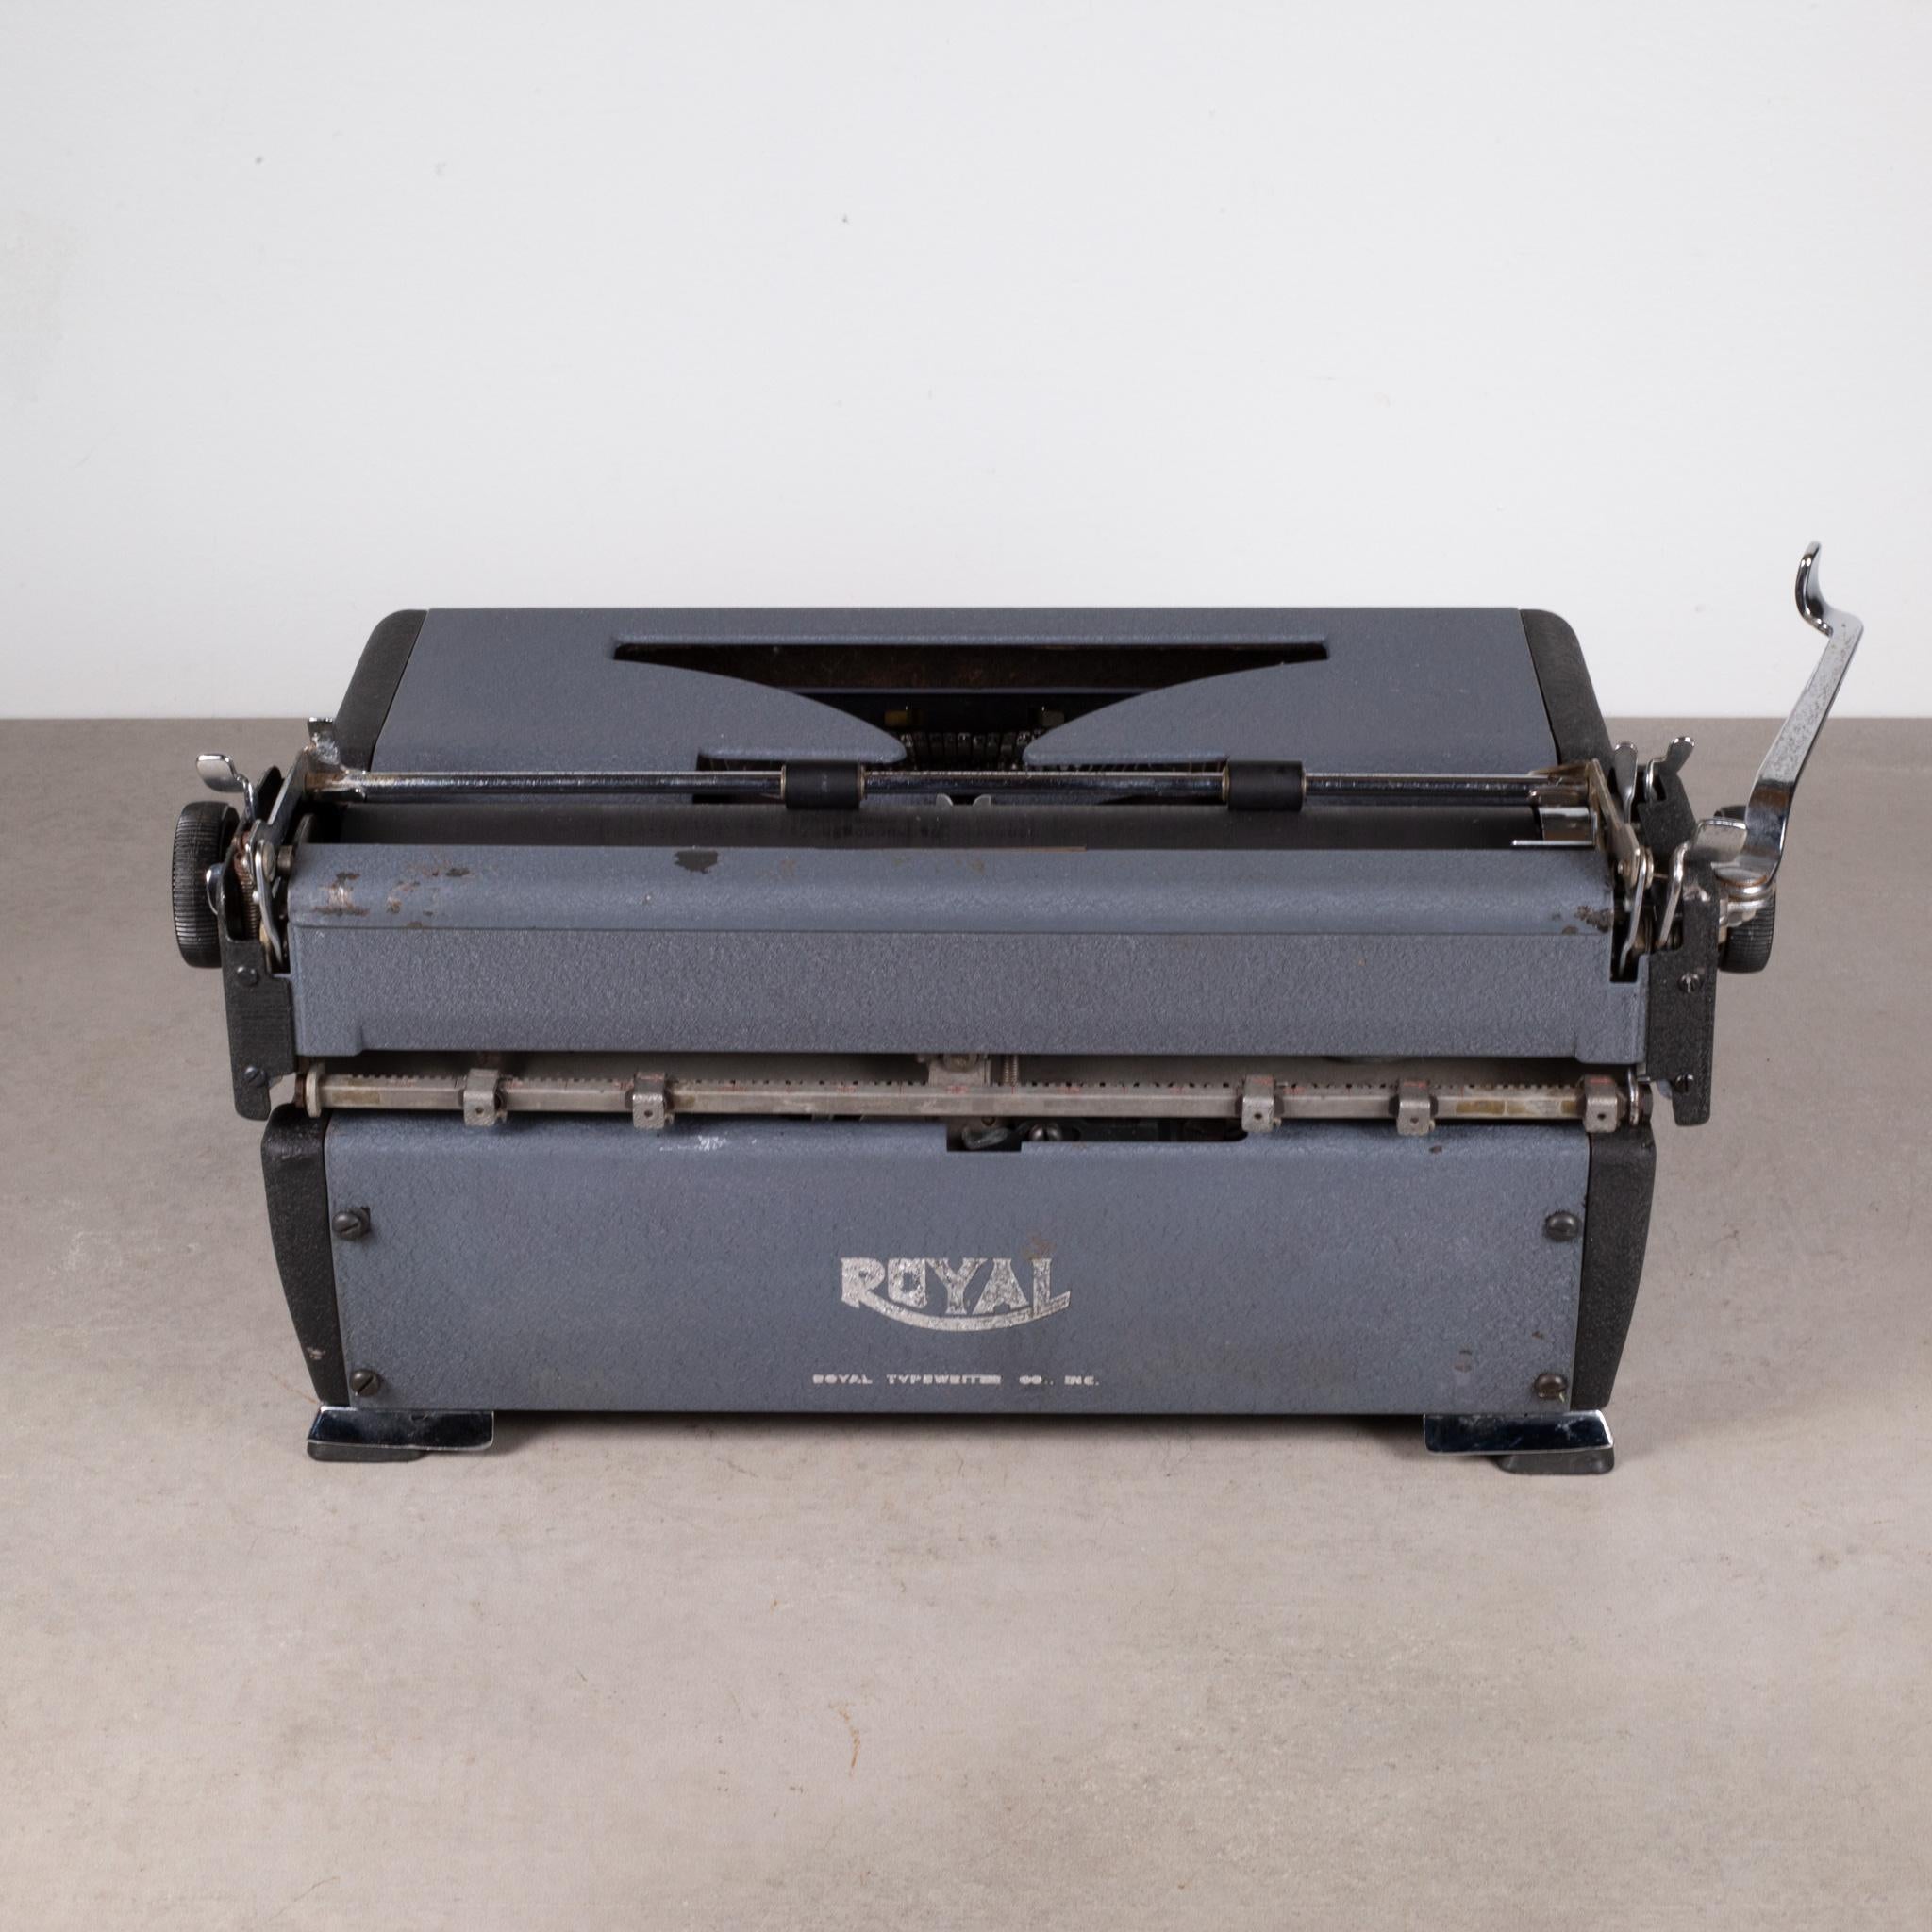 Industrial Royal Quiet DeLuxe Two Tone Typewriter and Case, c.1948  (FREE SHIPPING) For Sale